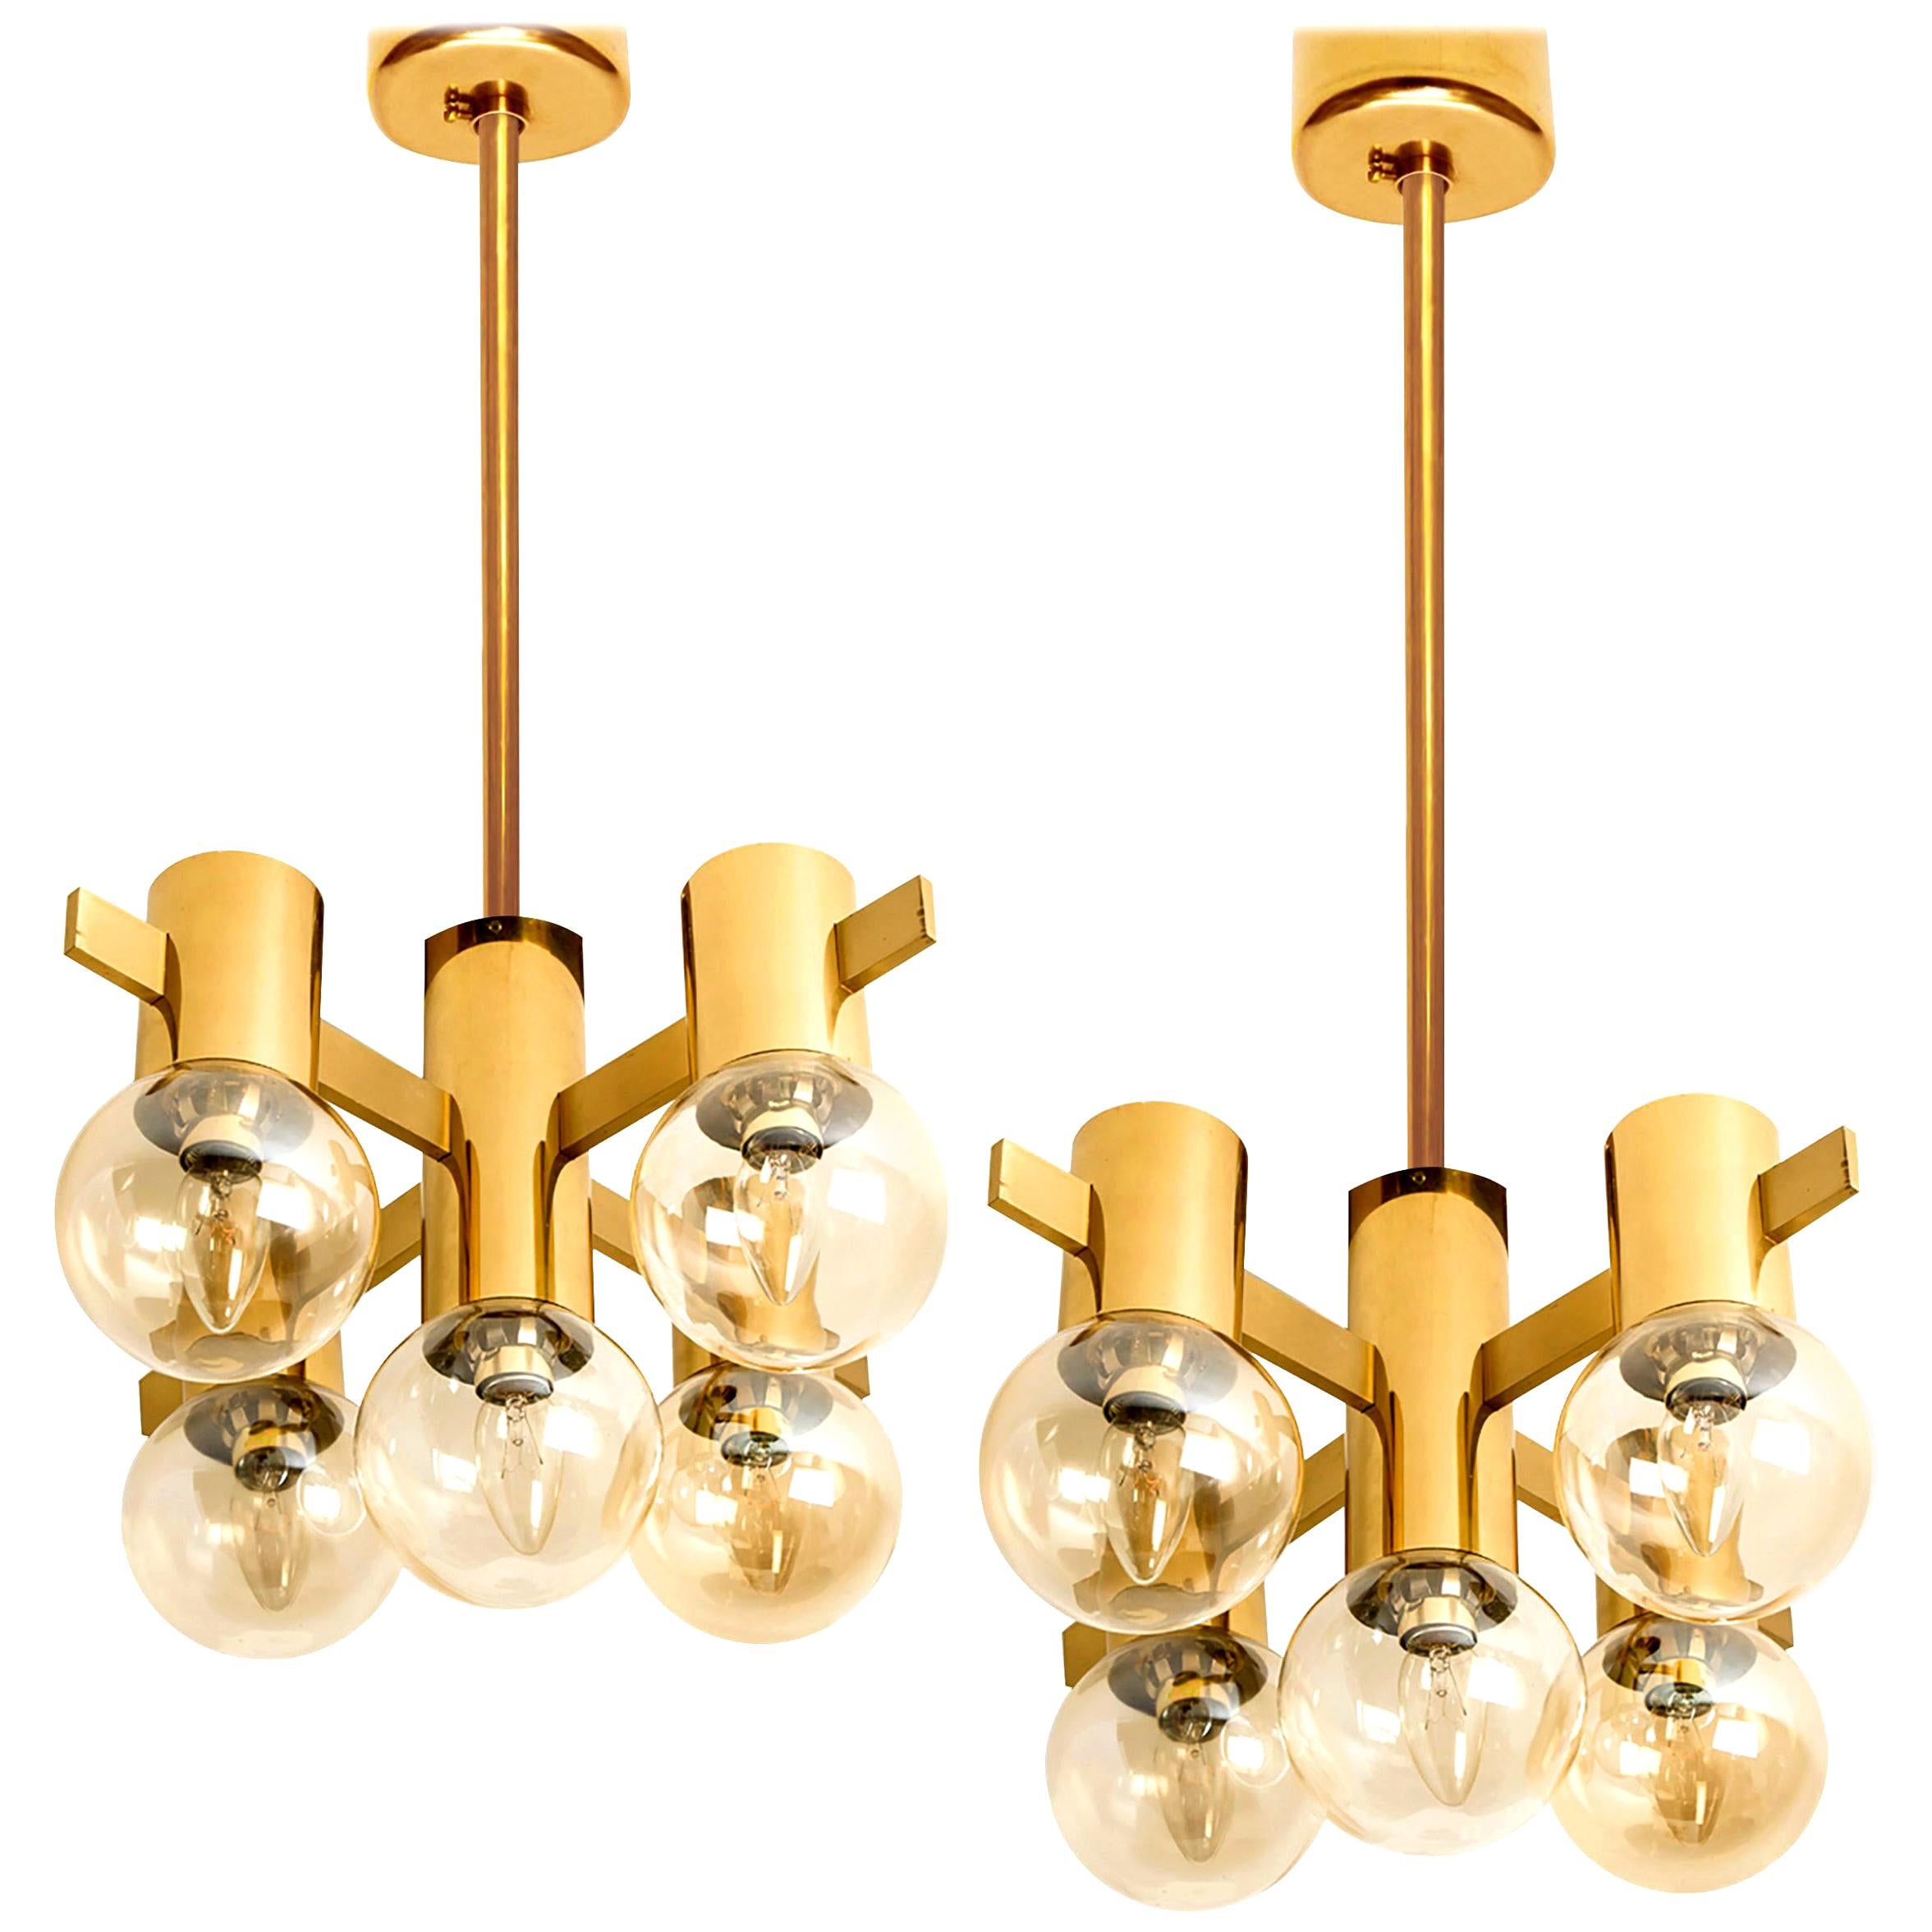 Pair of Brass and Glass Light Fixtures in the Style of Jakobsson, 1960s